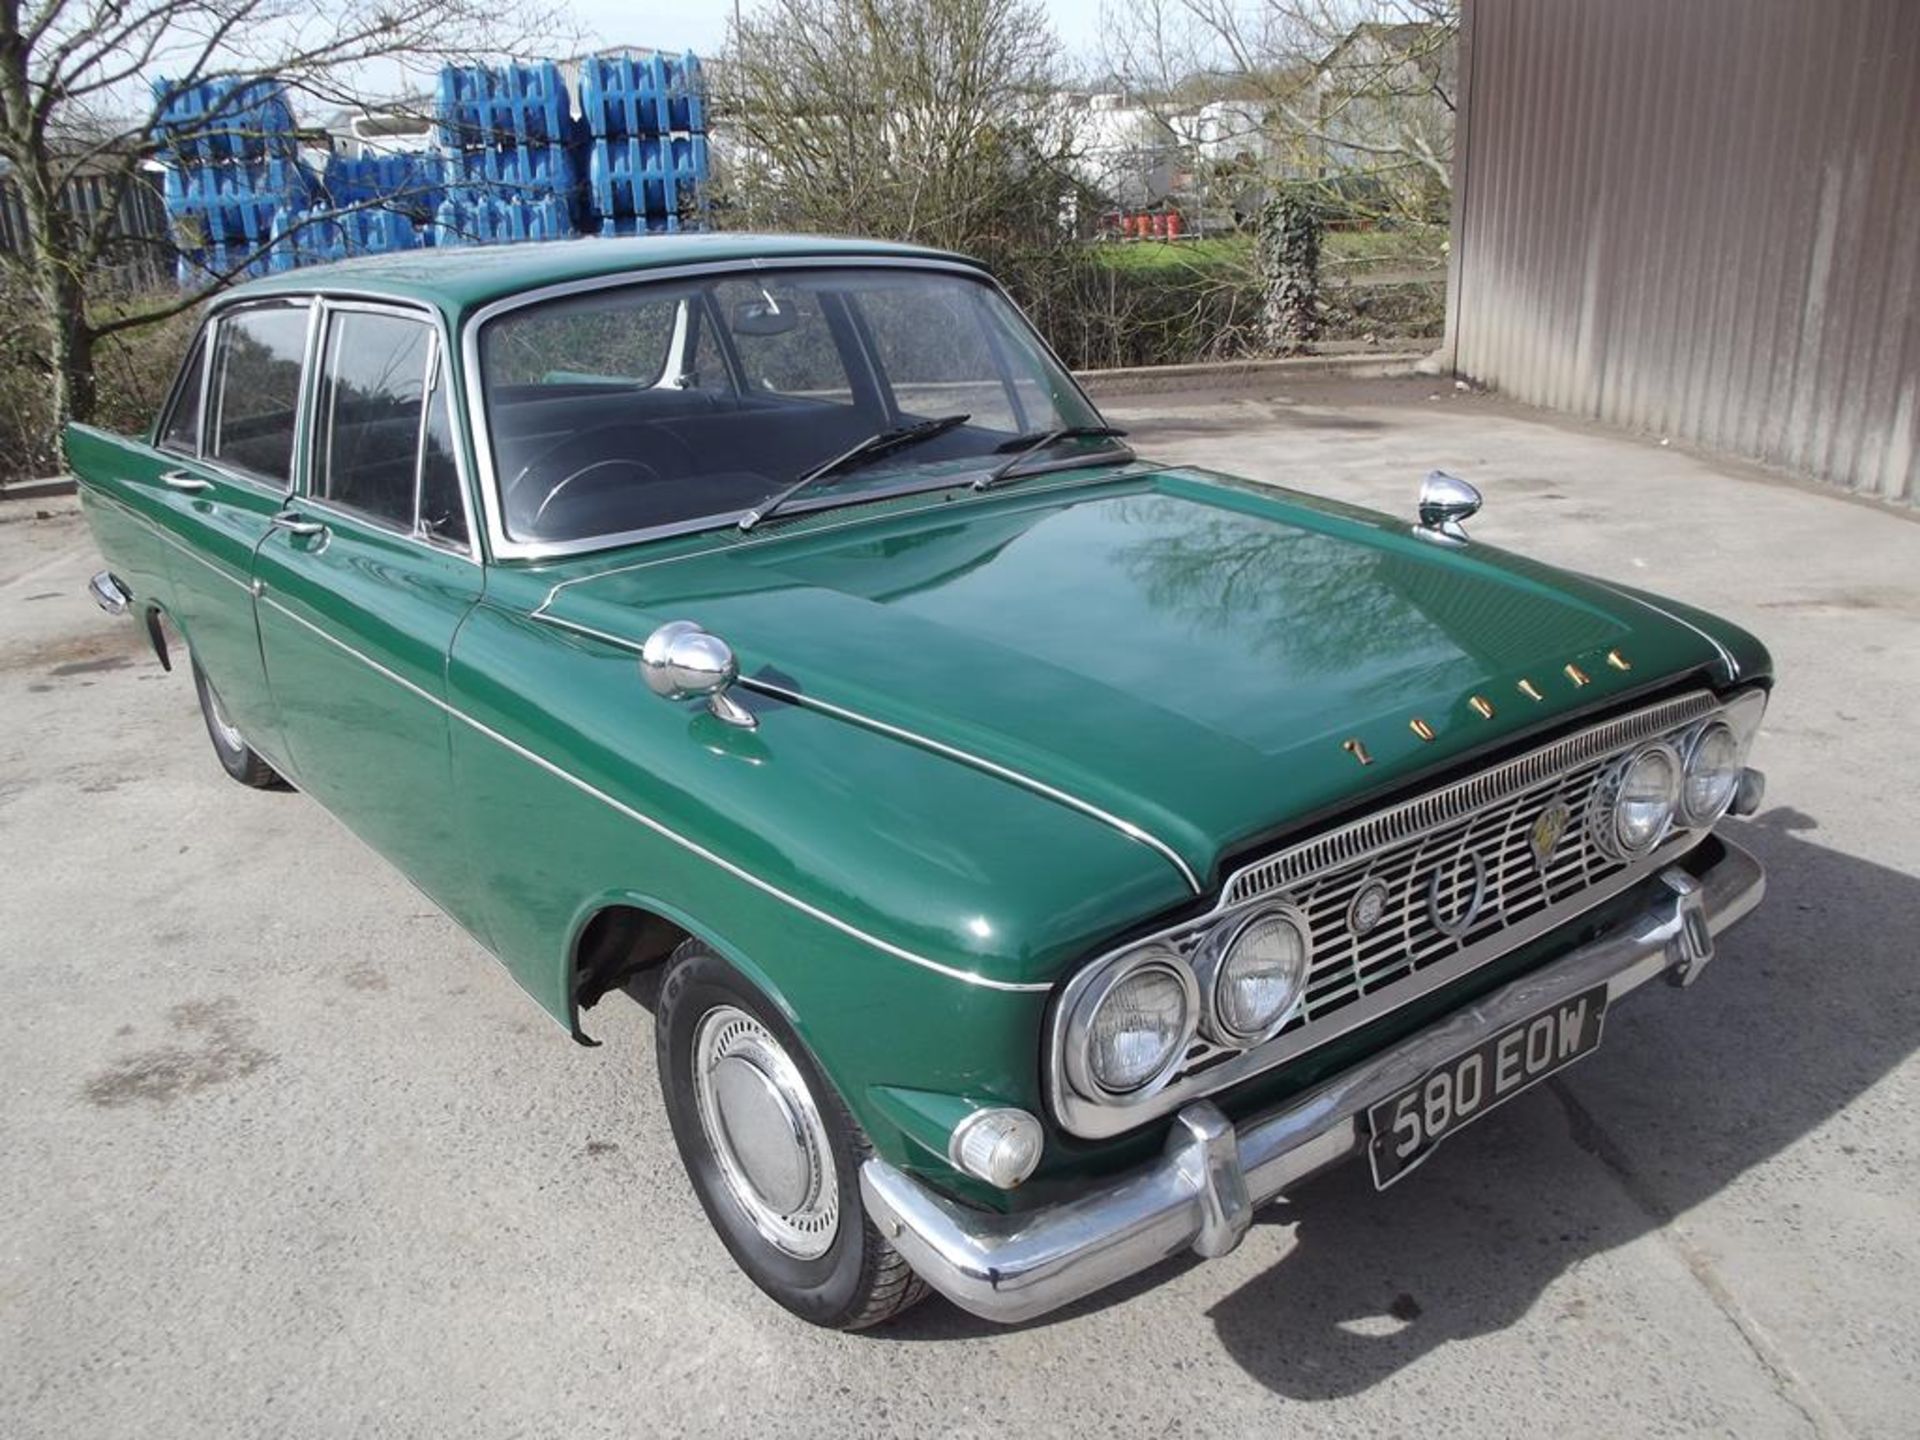 A 1963 Ford Zodiac Mk III, registration number 580 EOW, chassis number Z64C-186080, green. The Mk